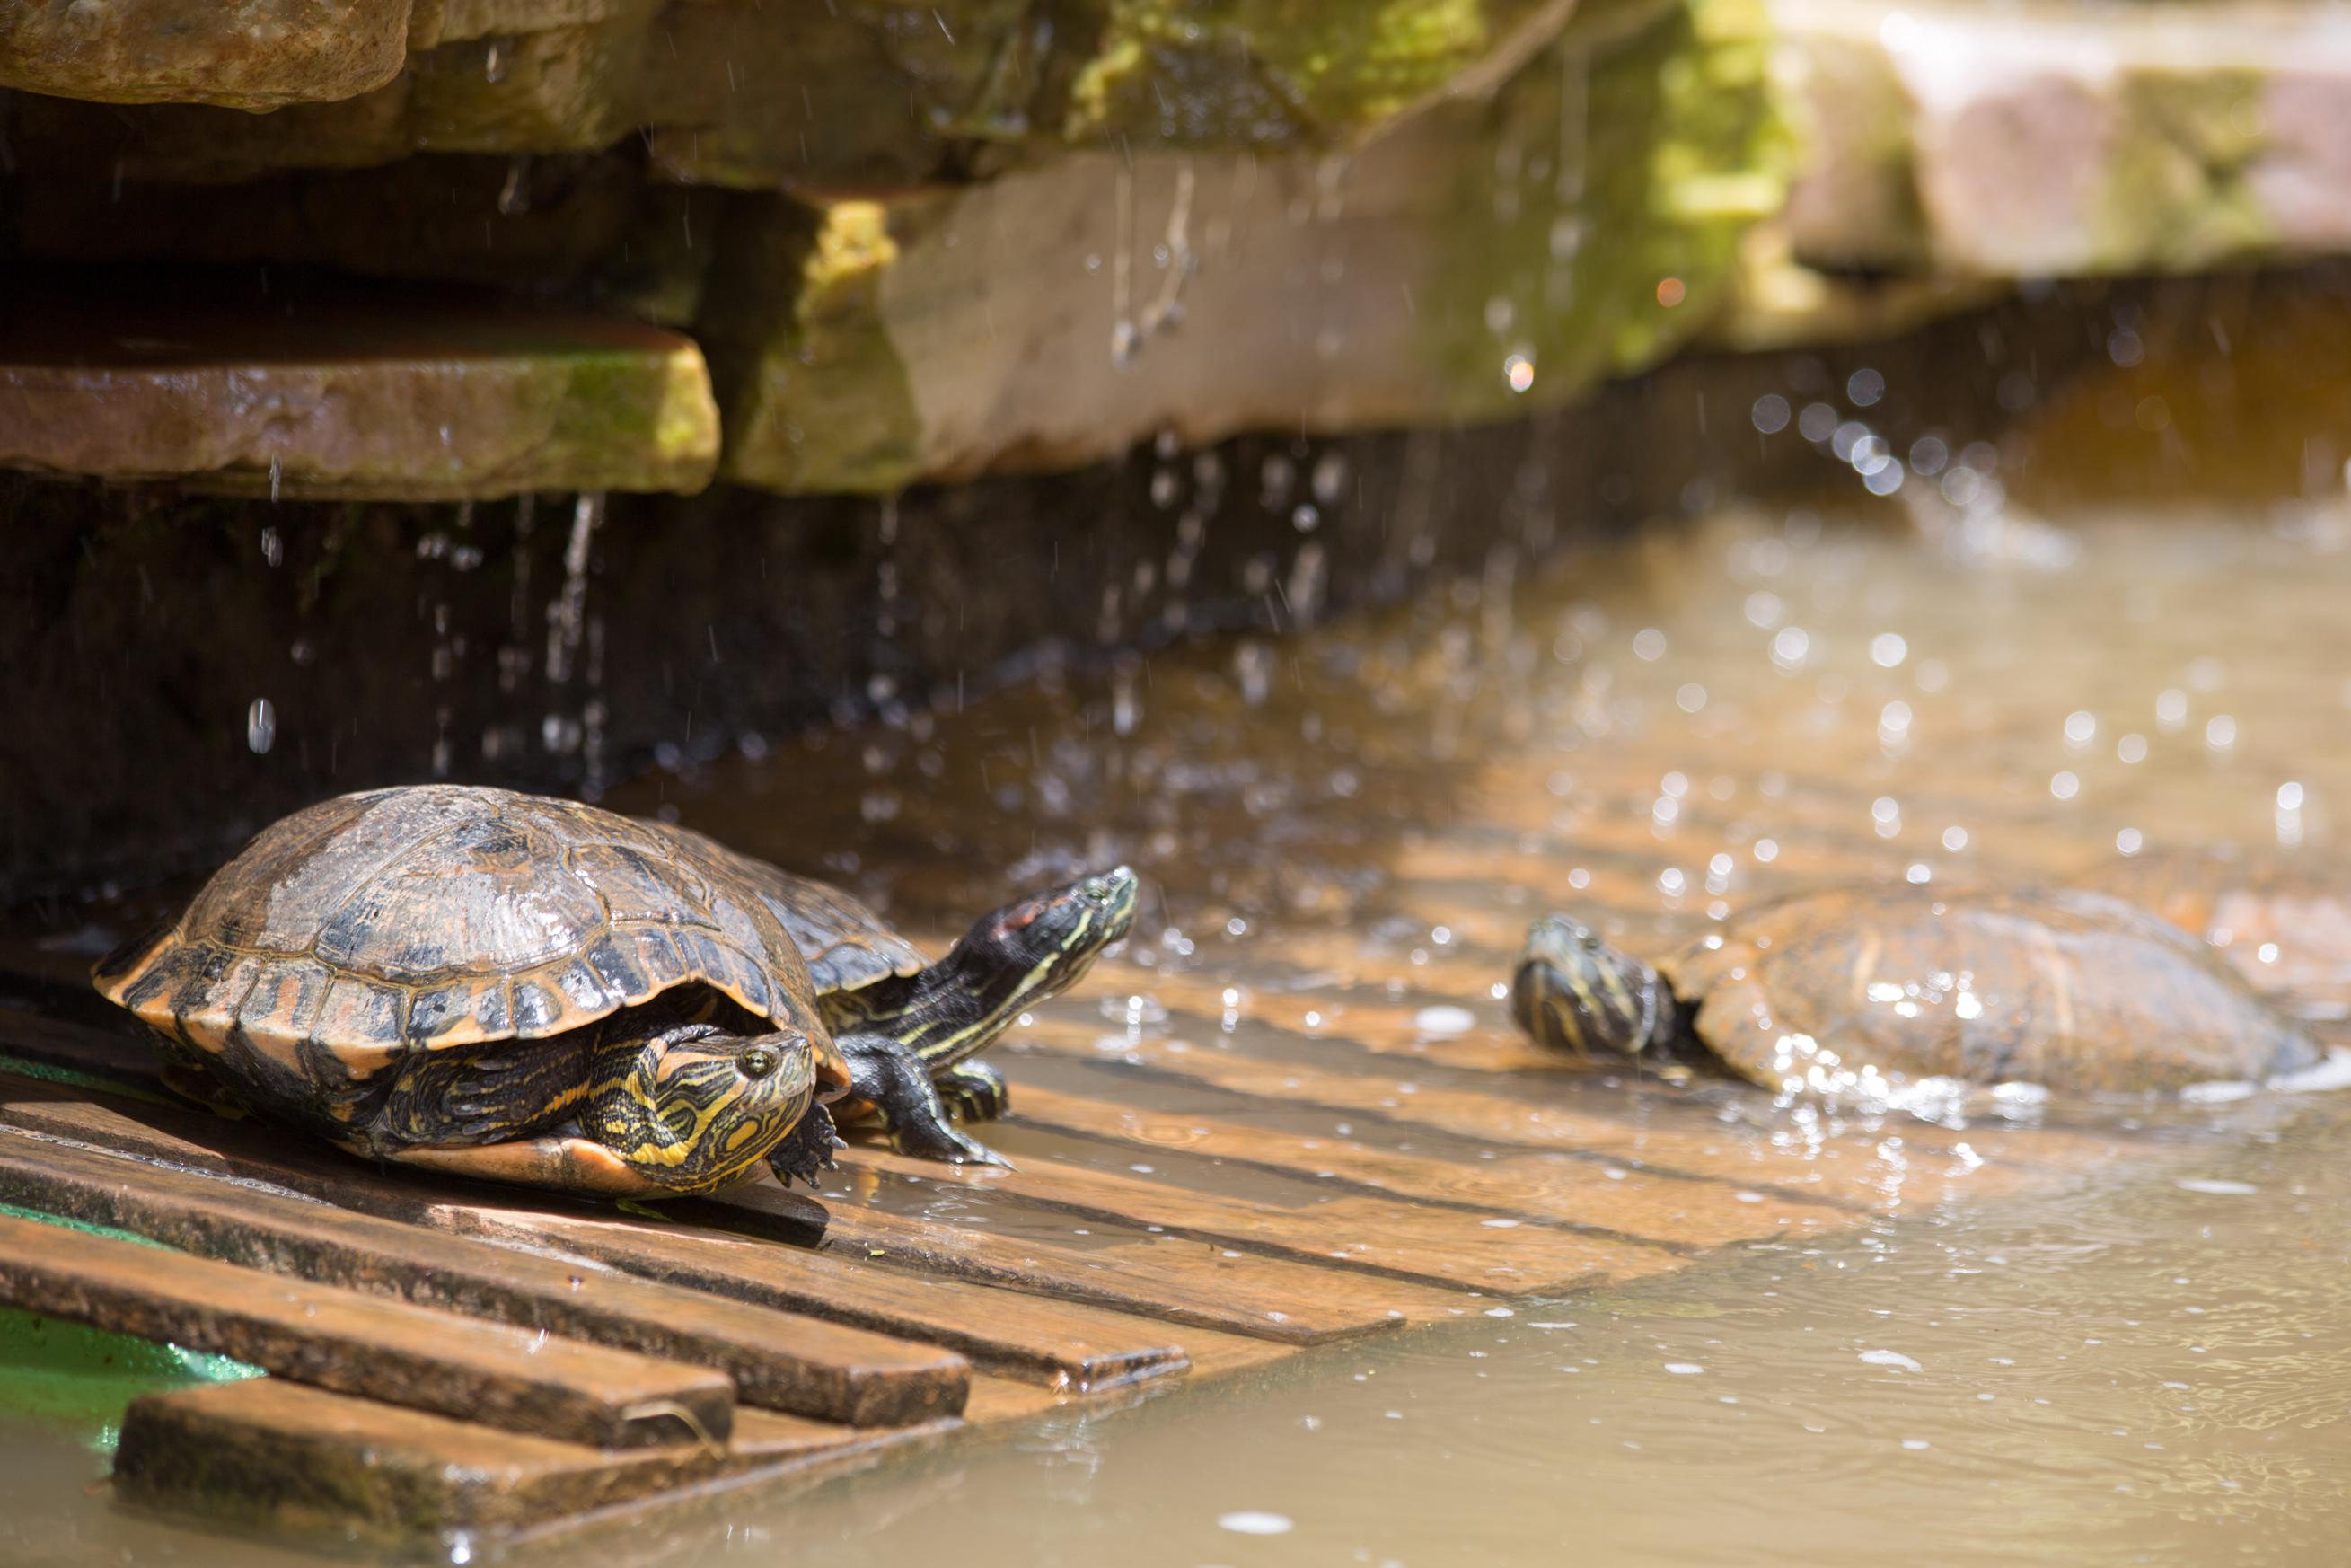 Benefits of using a water heater for turtles